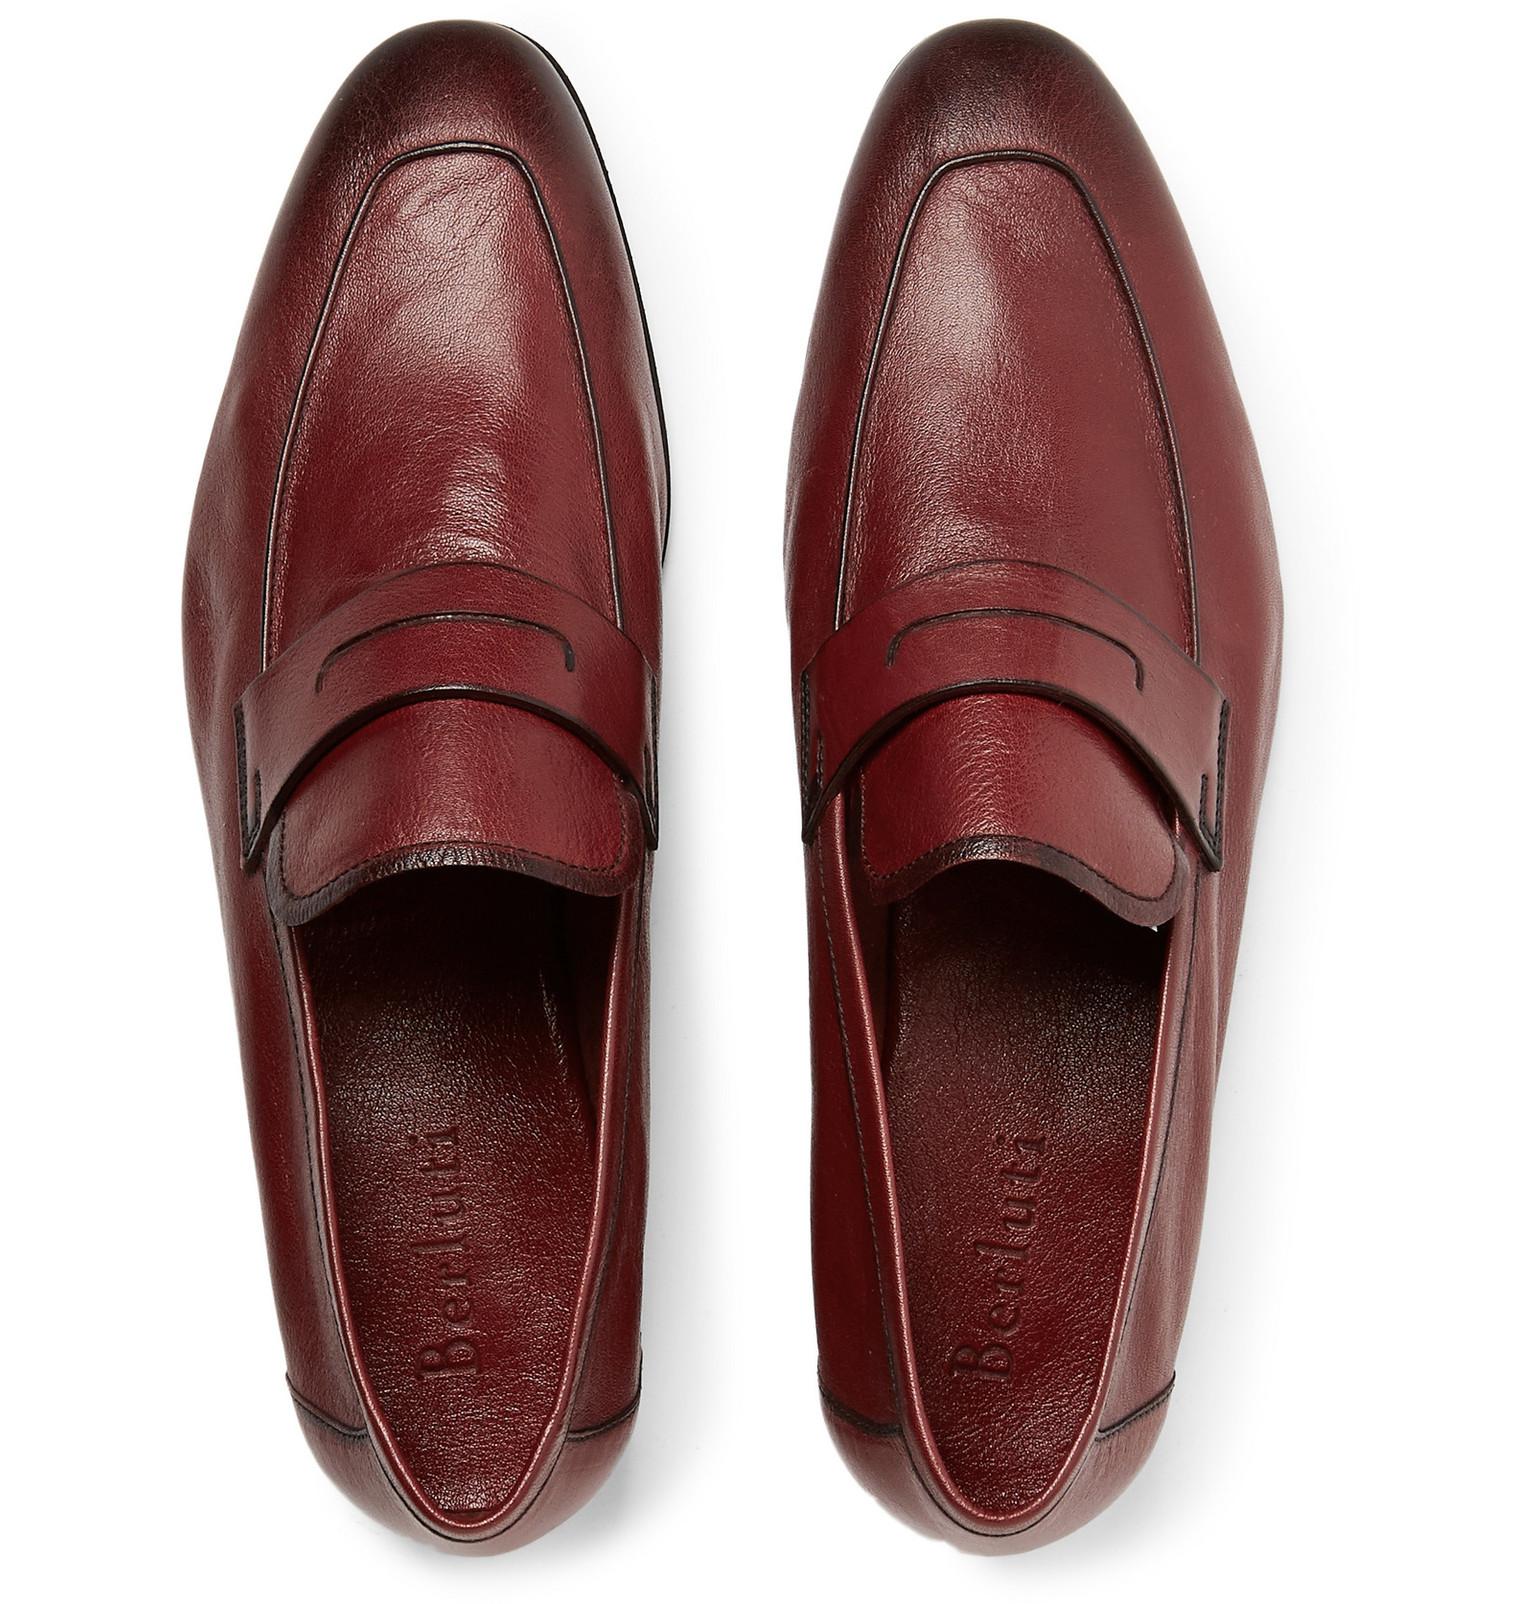 Berluti Lorenzo Leather Loafers in Burgundy (Red) for Men - Lyst